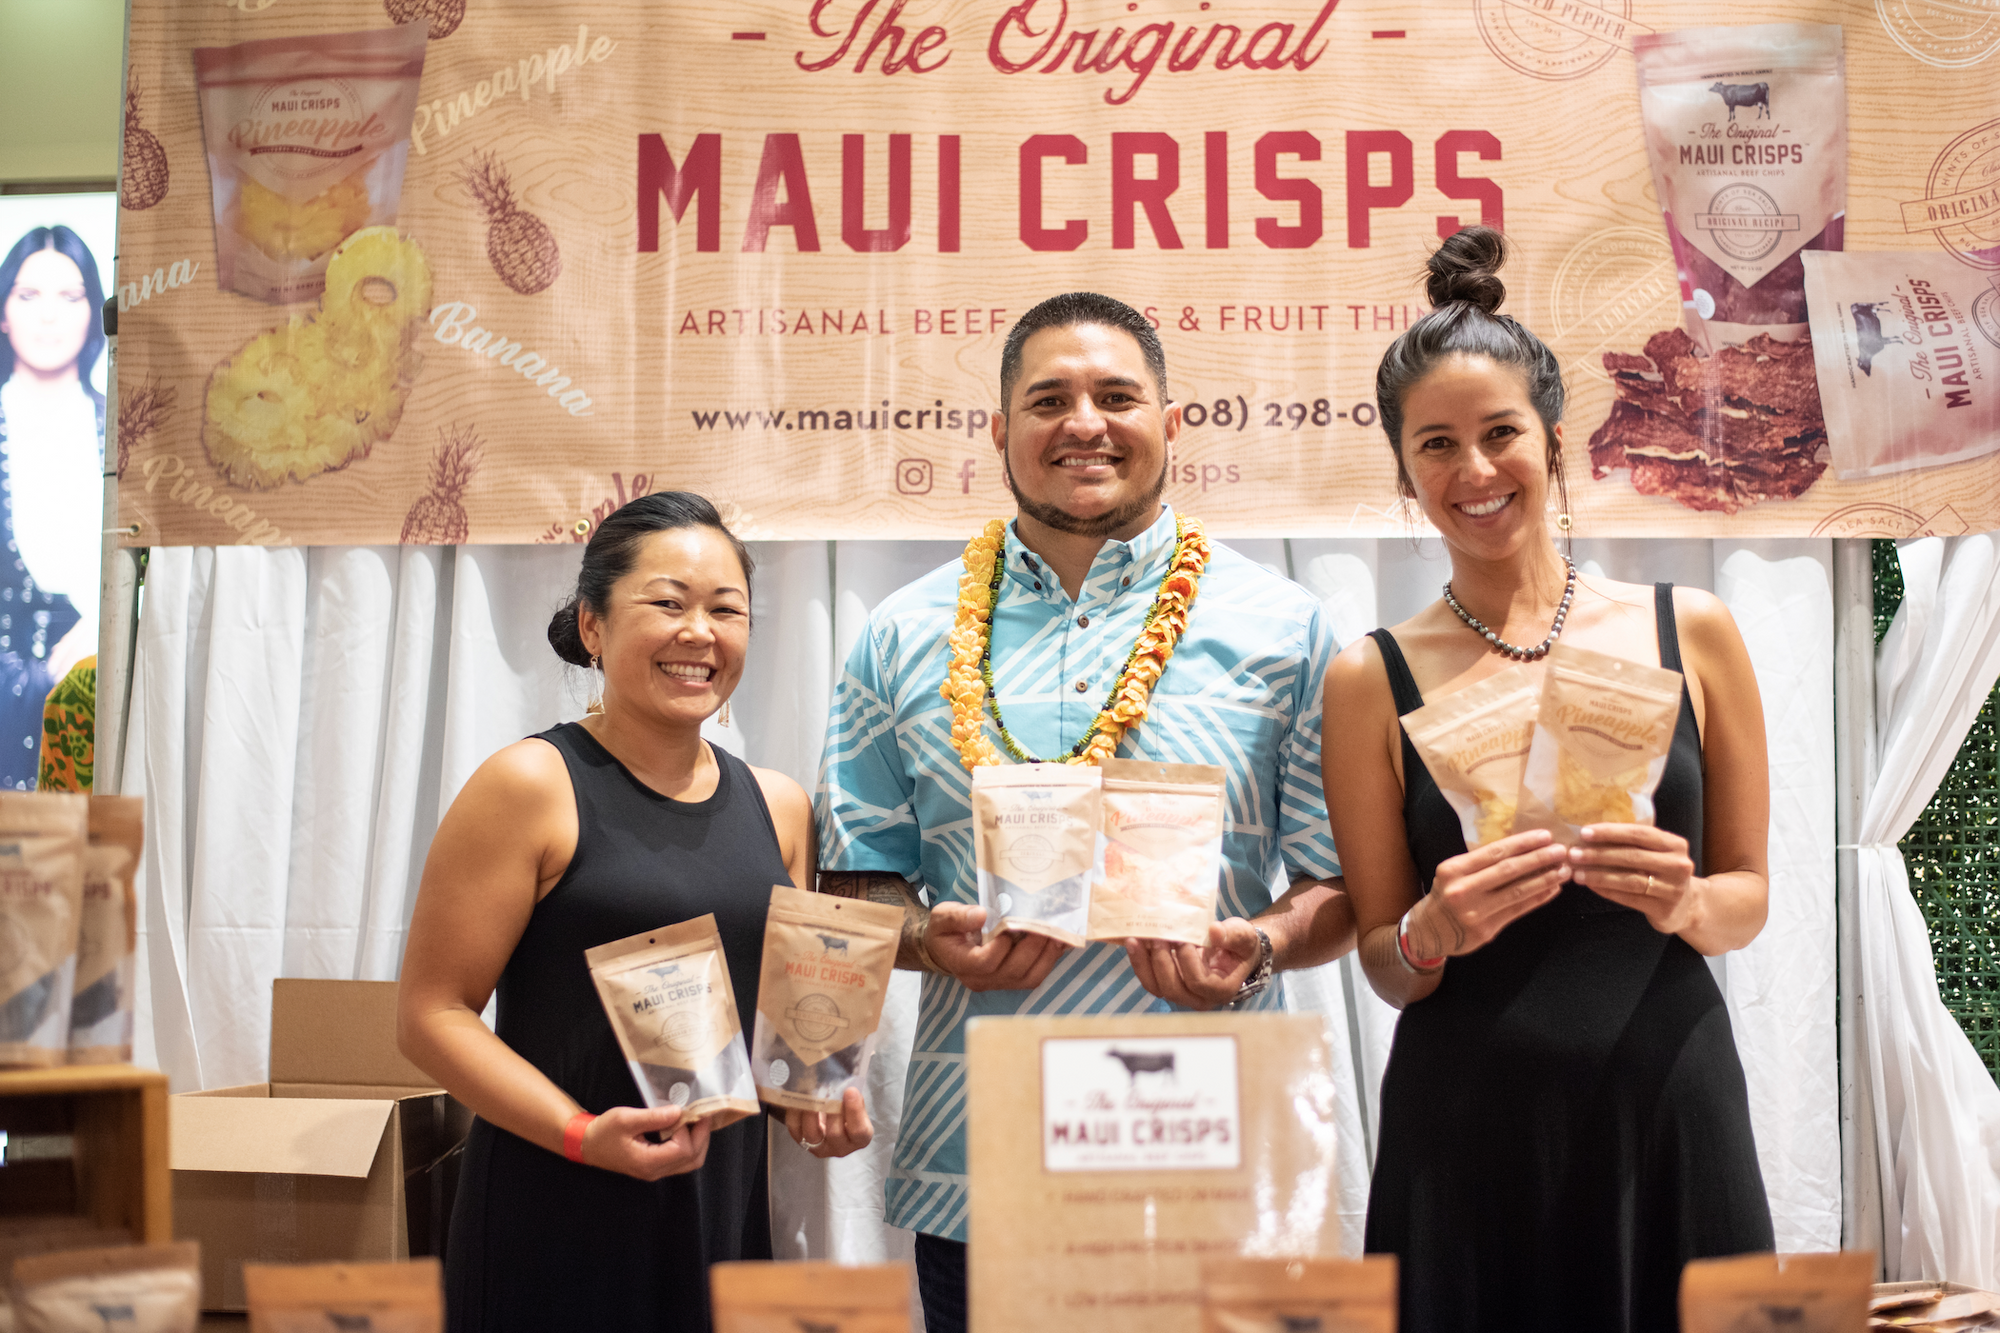 3 people smiling holding up Maui Crisps snack bags